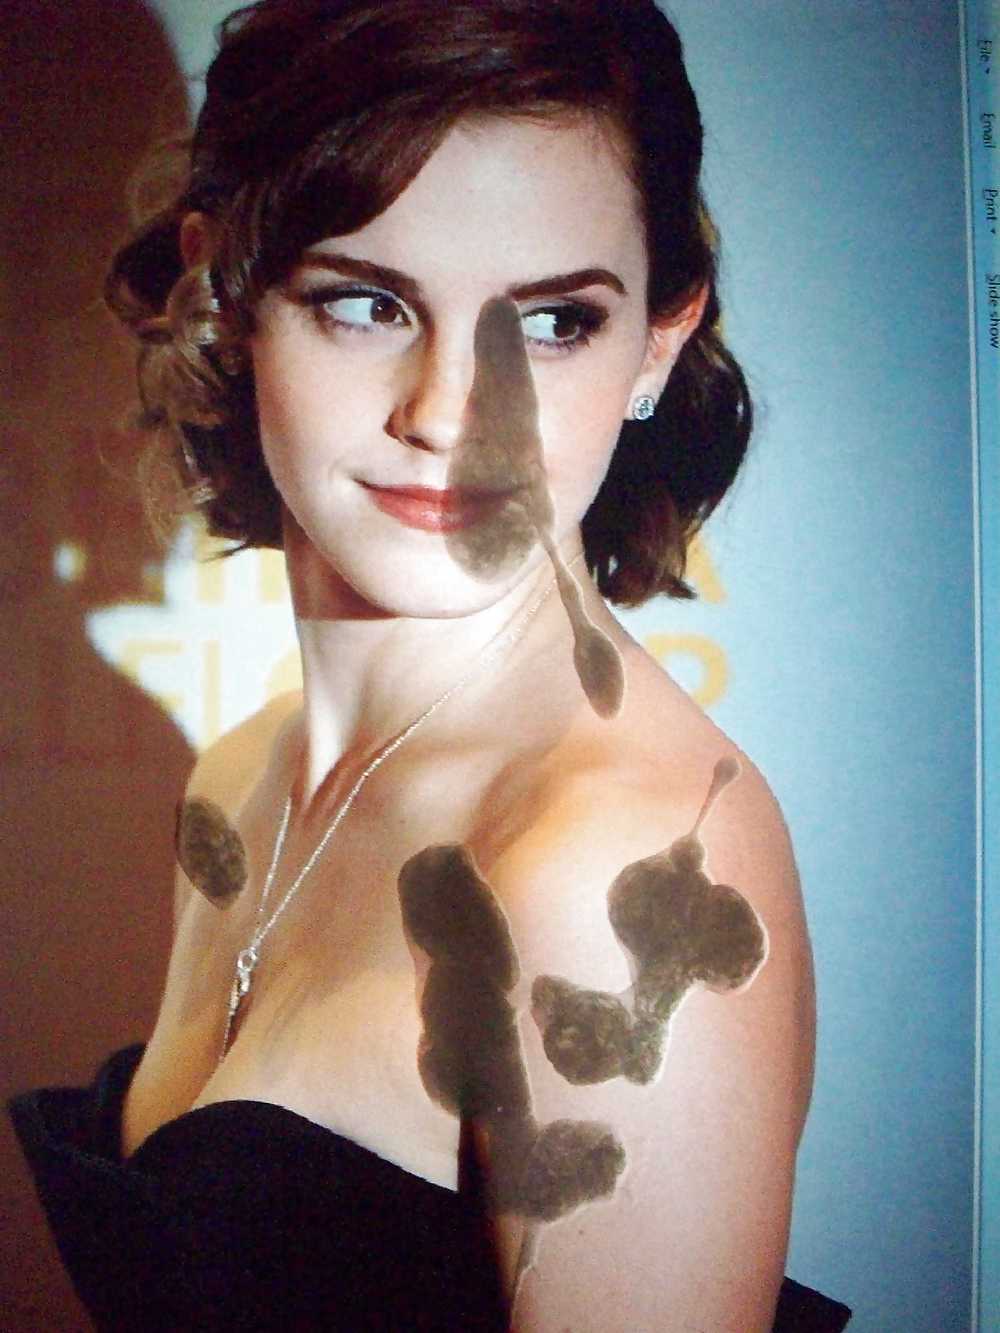 Emma Watson - 2 for one special. #11292680